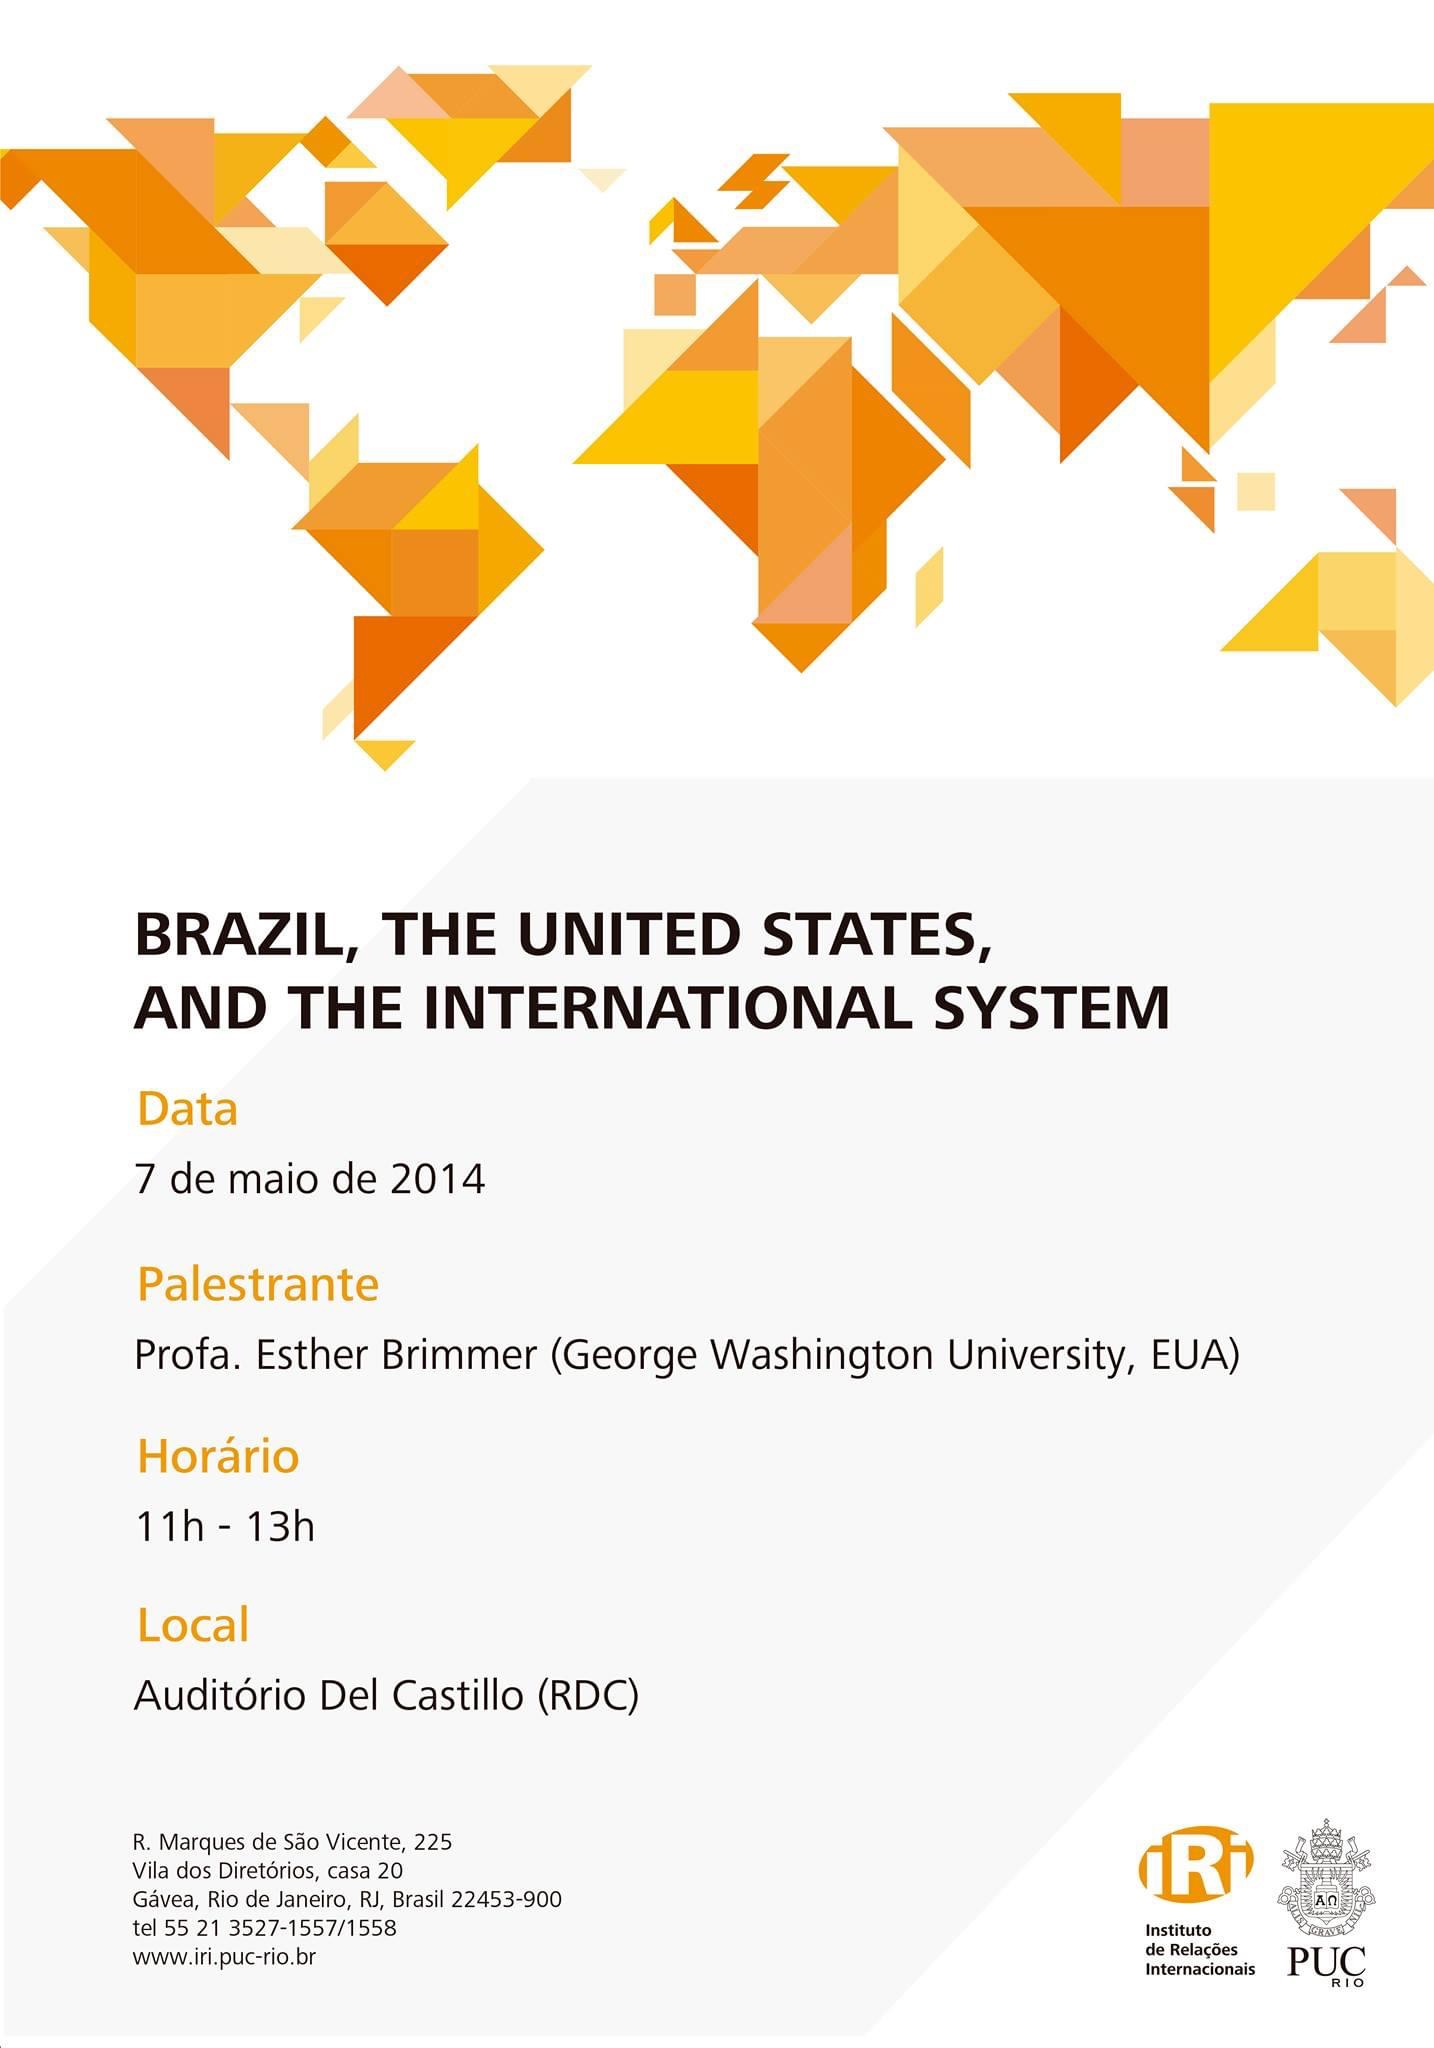 Brazil, The United States and the International System